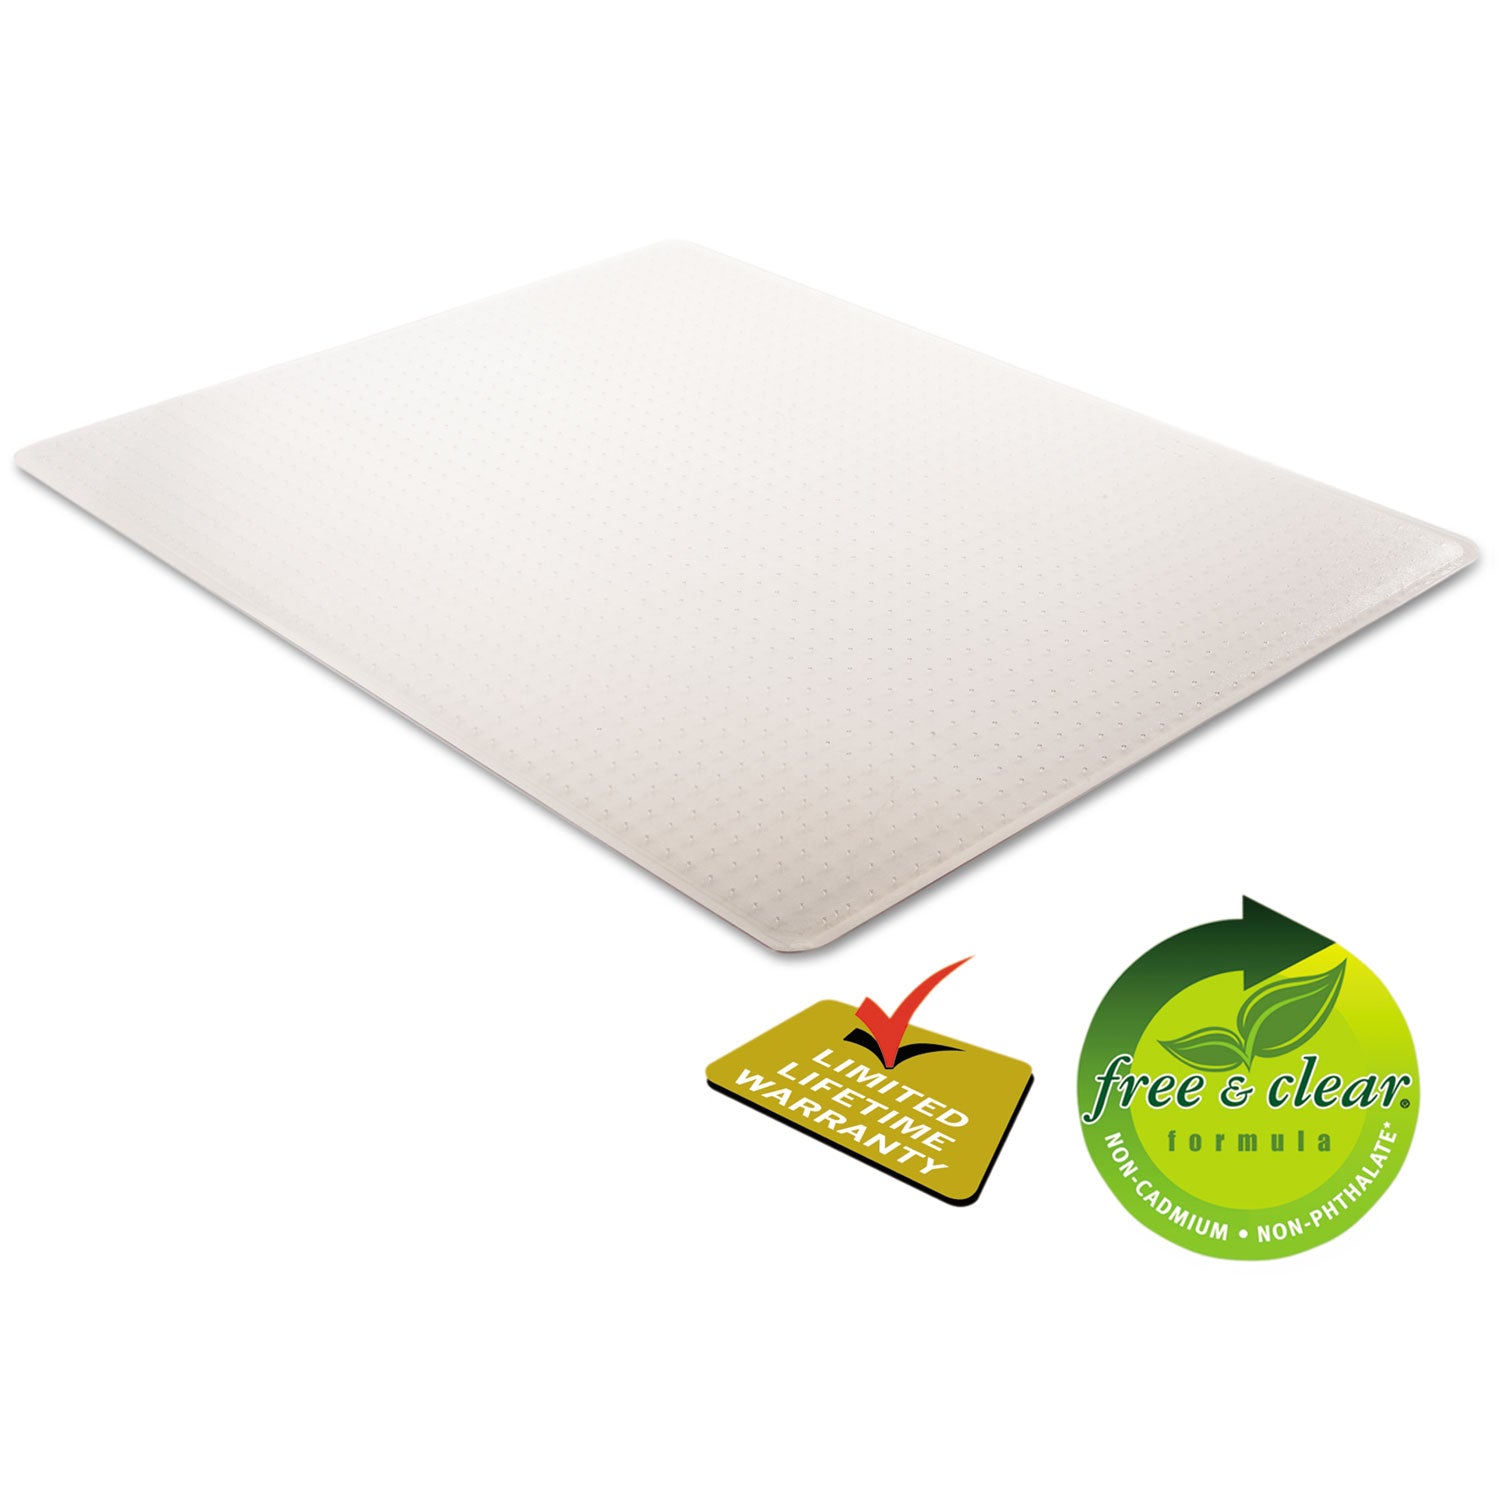 SuperMat Frequent Use Chair Mat, Med Pile Carpet, 45 x 53, Beveled Rectangle, Clear - 